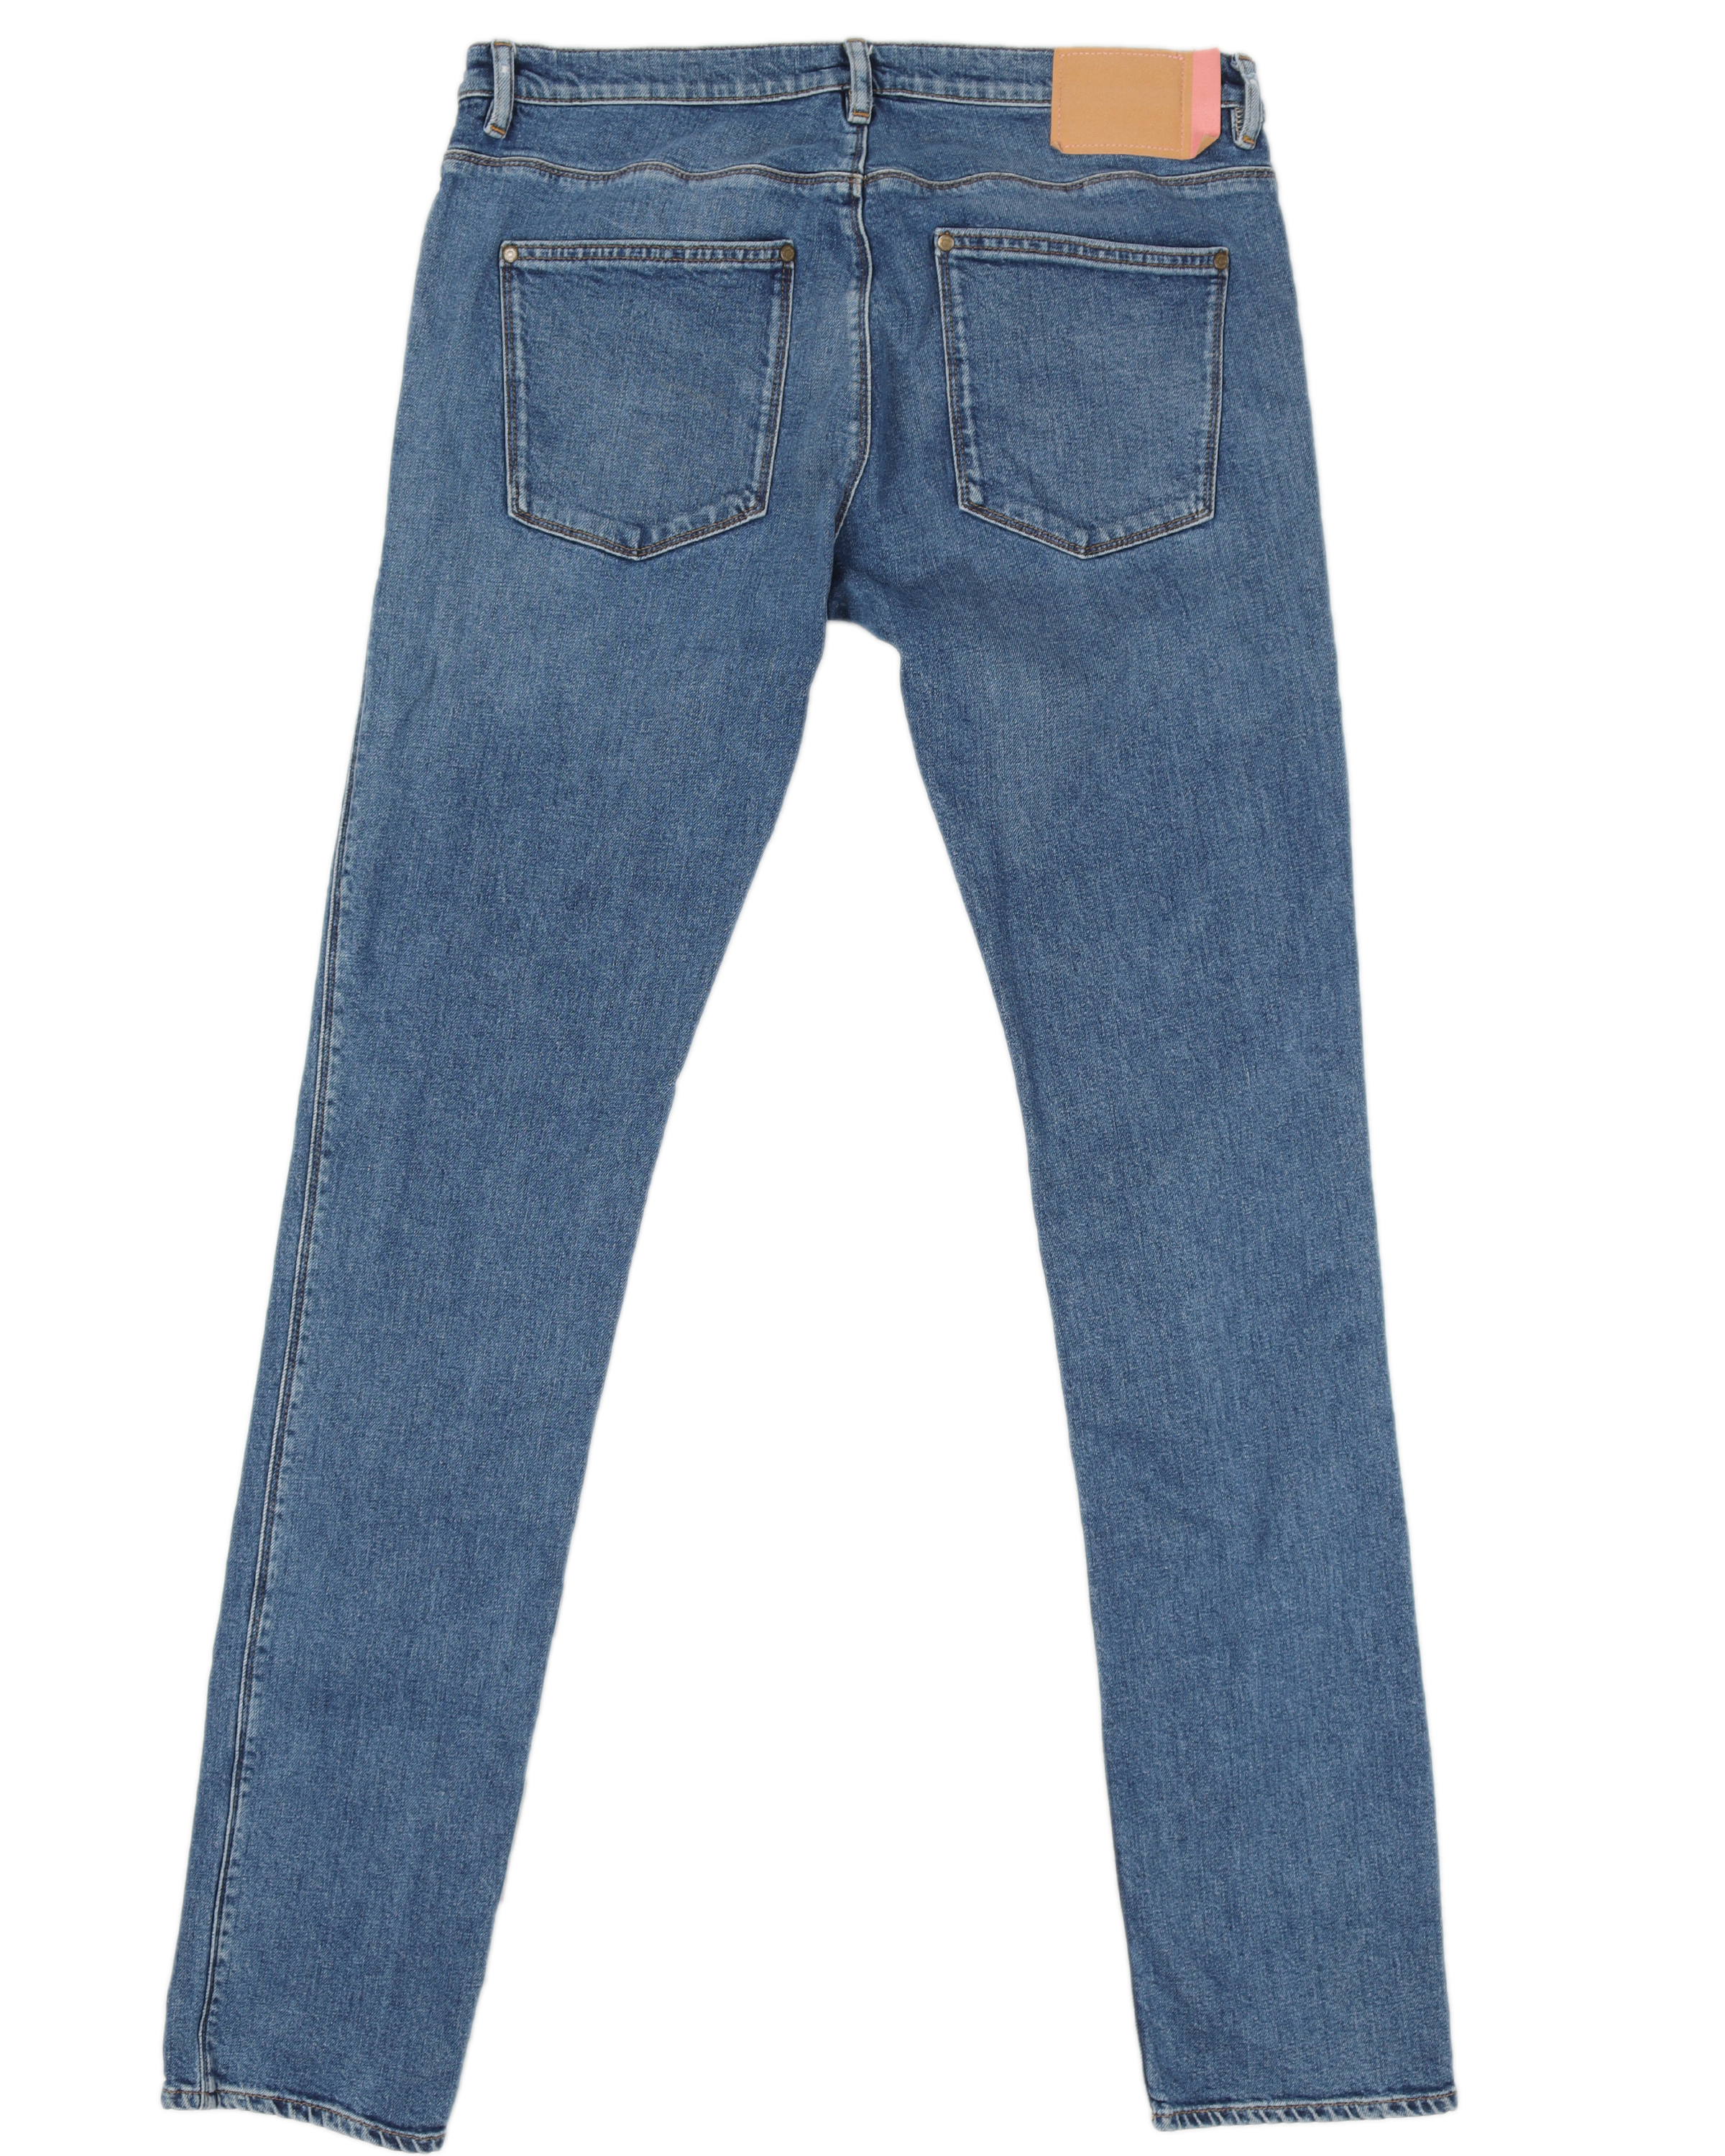 Low-Rise Skinny Jeans